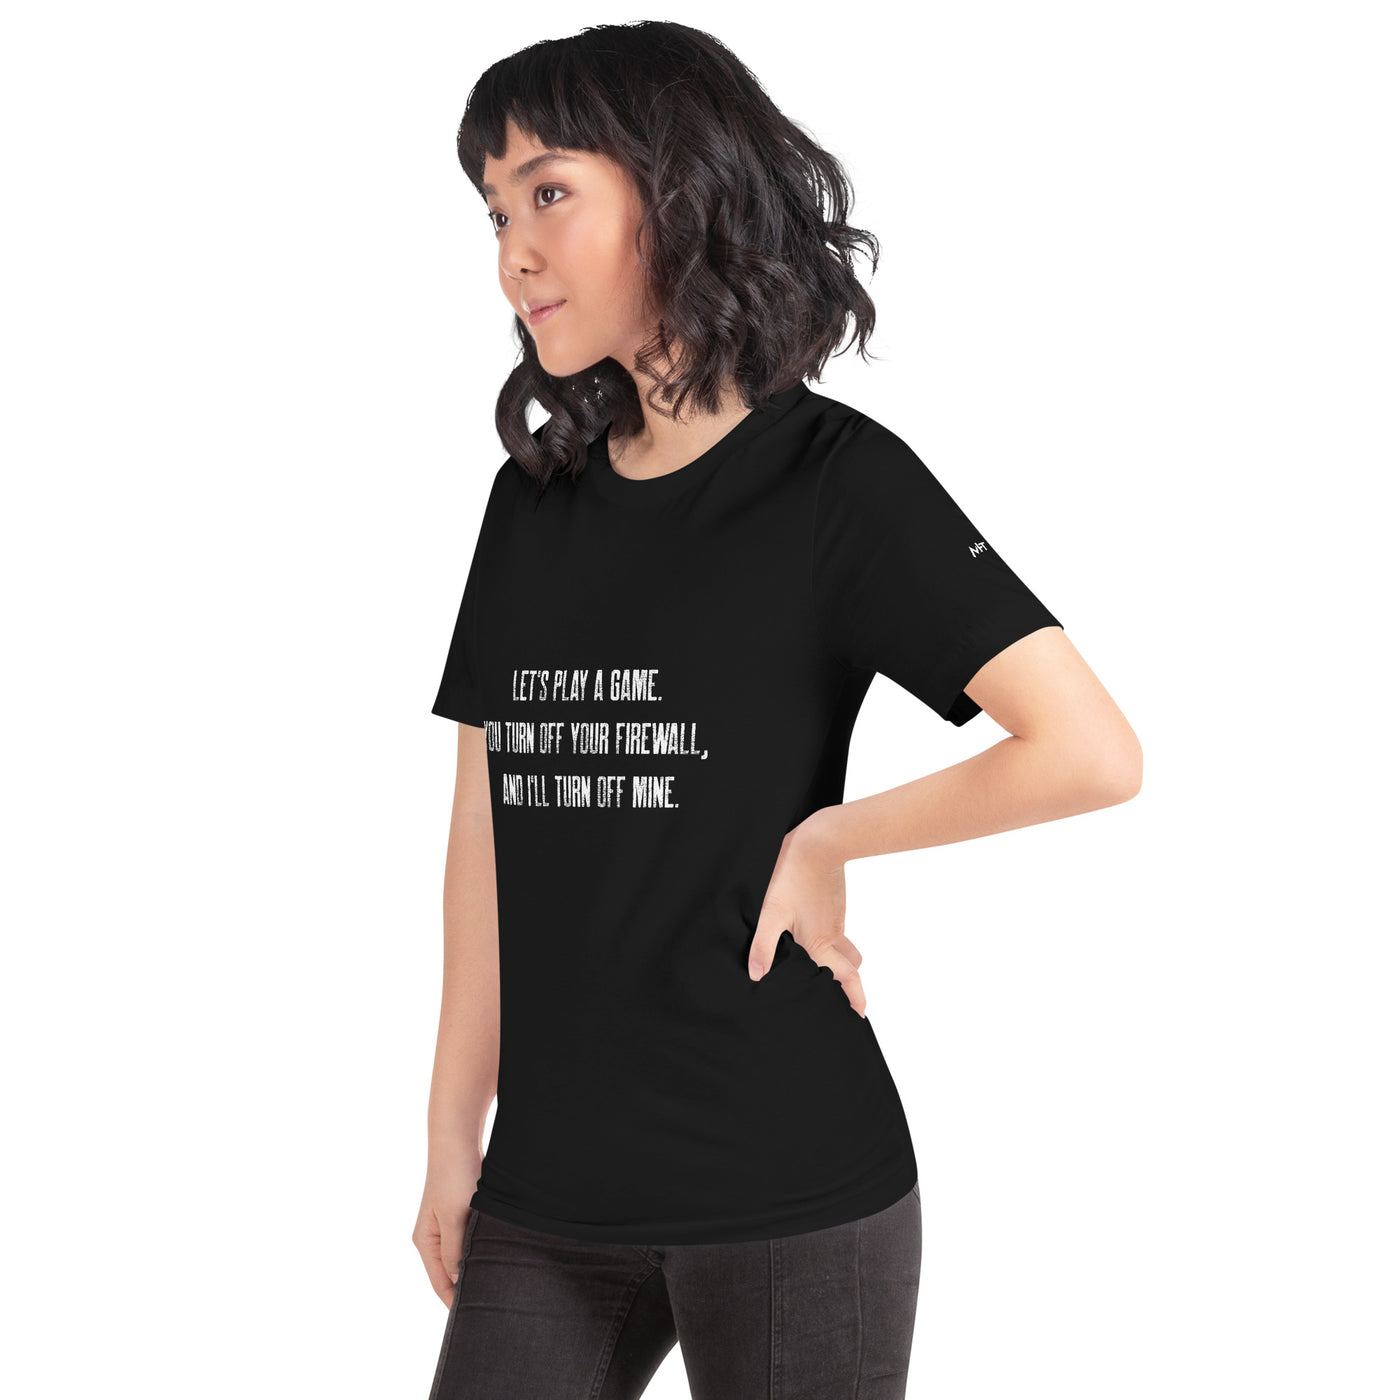 Let's Play a game: You Turn off your firewall and I'll Turn off mine V2 - Unisex t-shirt